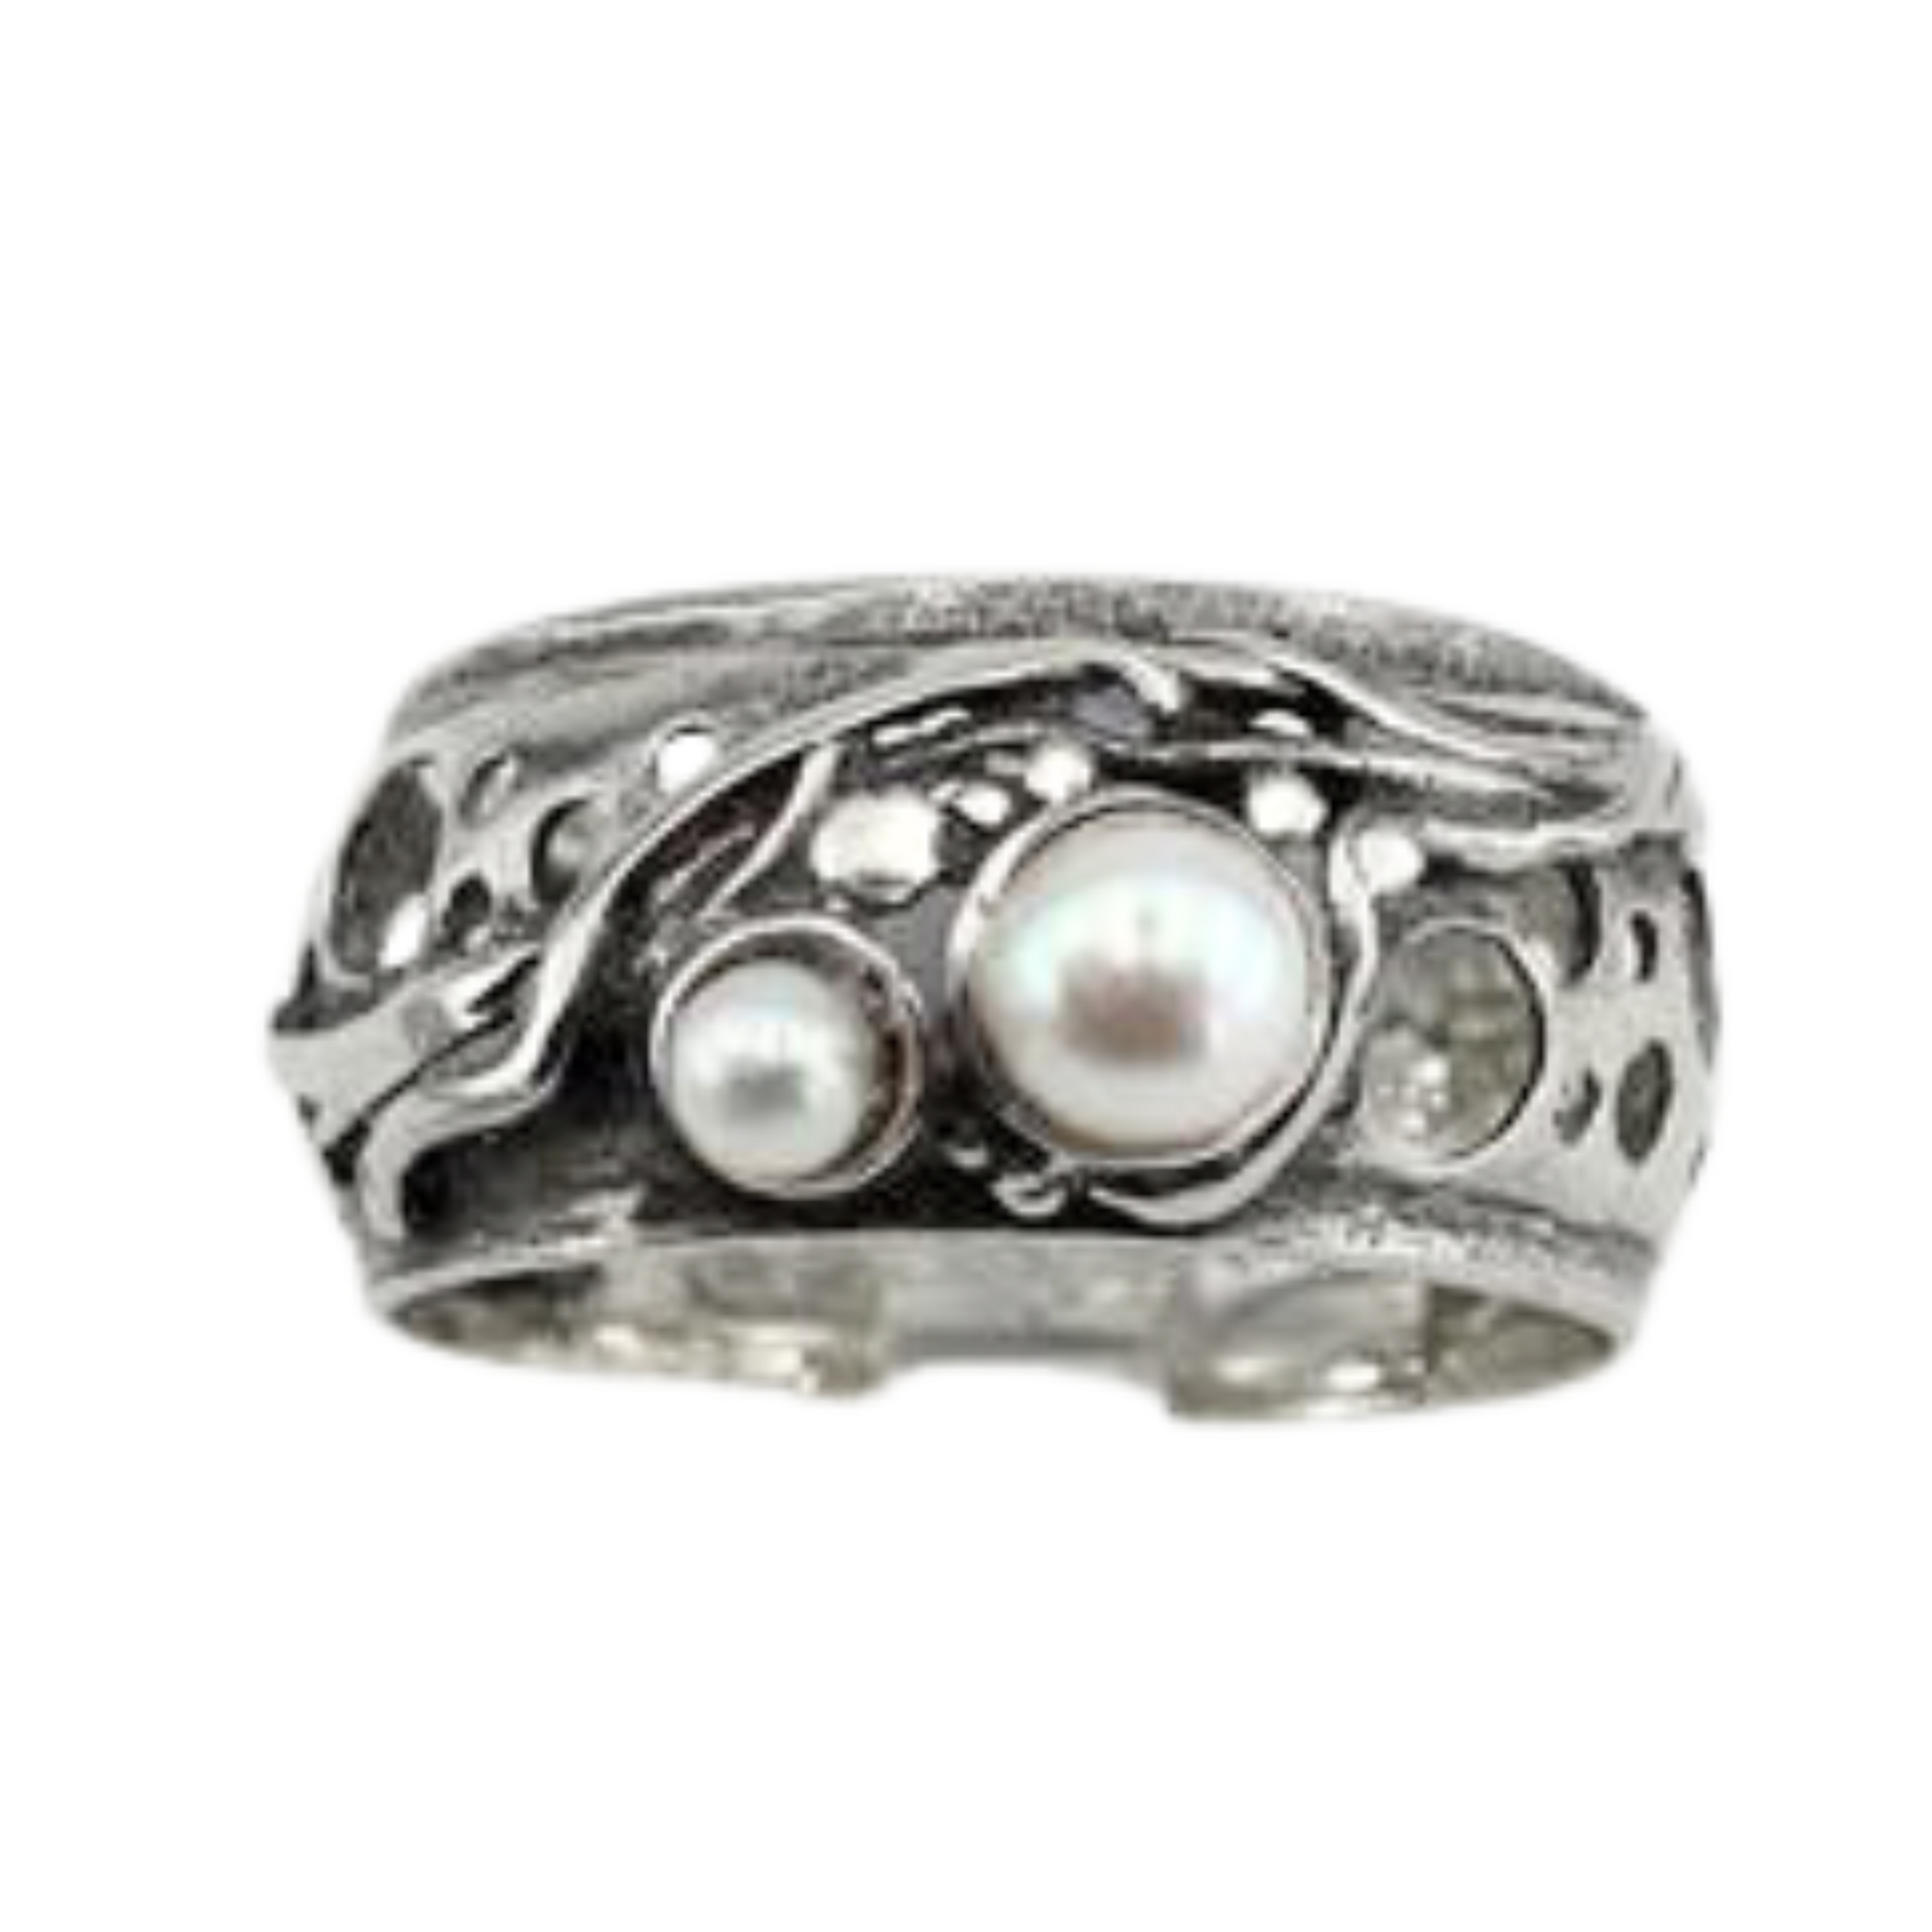 Solid silver ring with genuine natural pearls, Israeli jewelry, Israeli design, wide ring, men ring, unisex ring, pearl ring